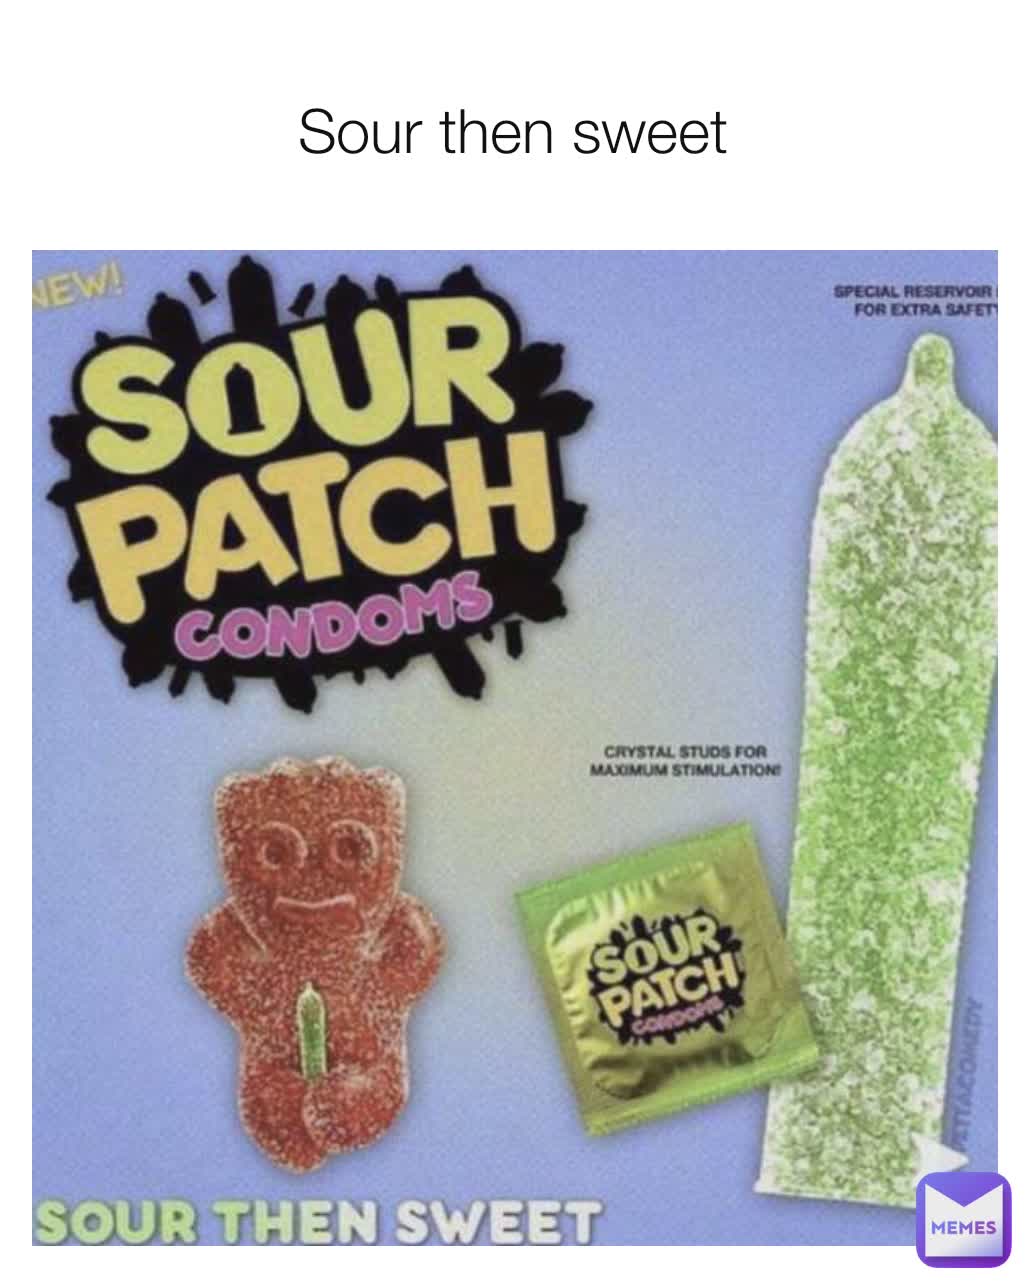 Sour then sweet